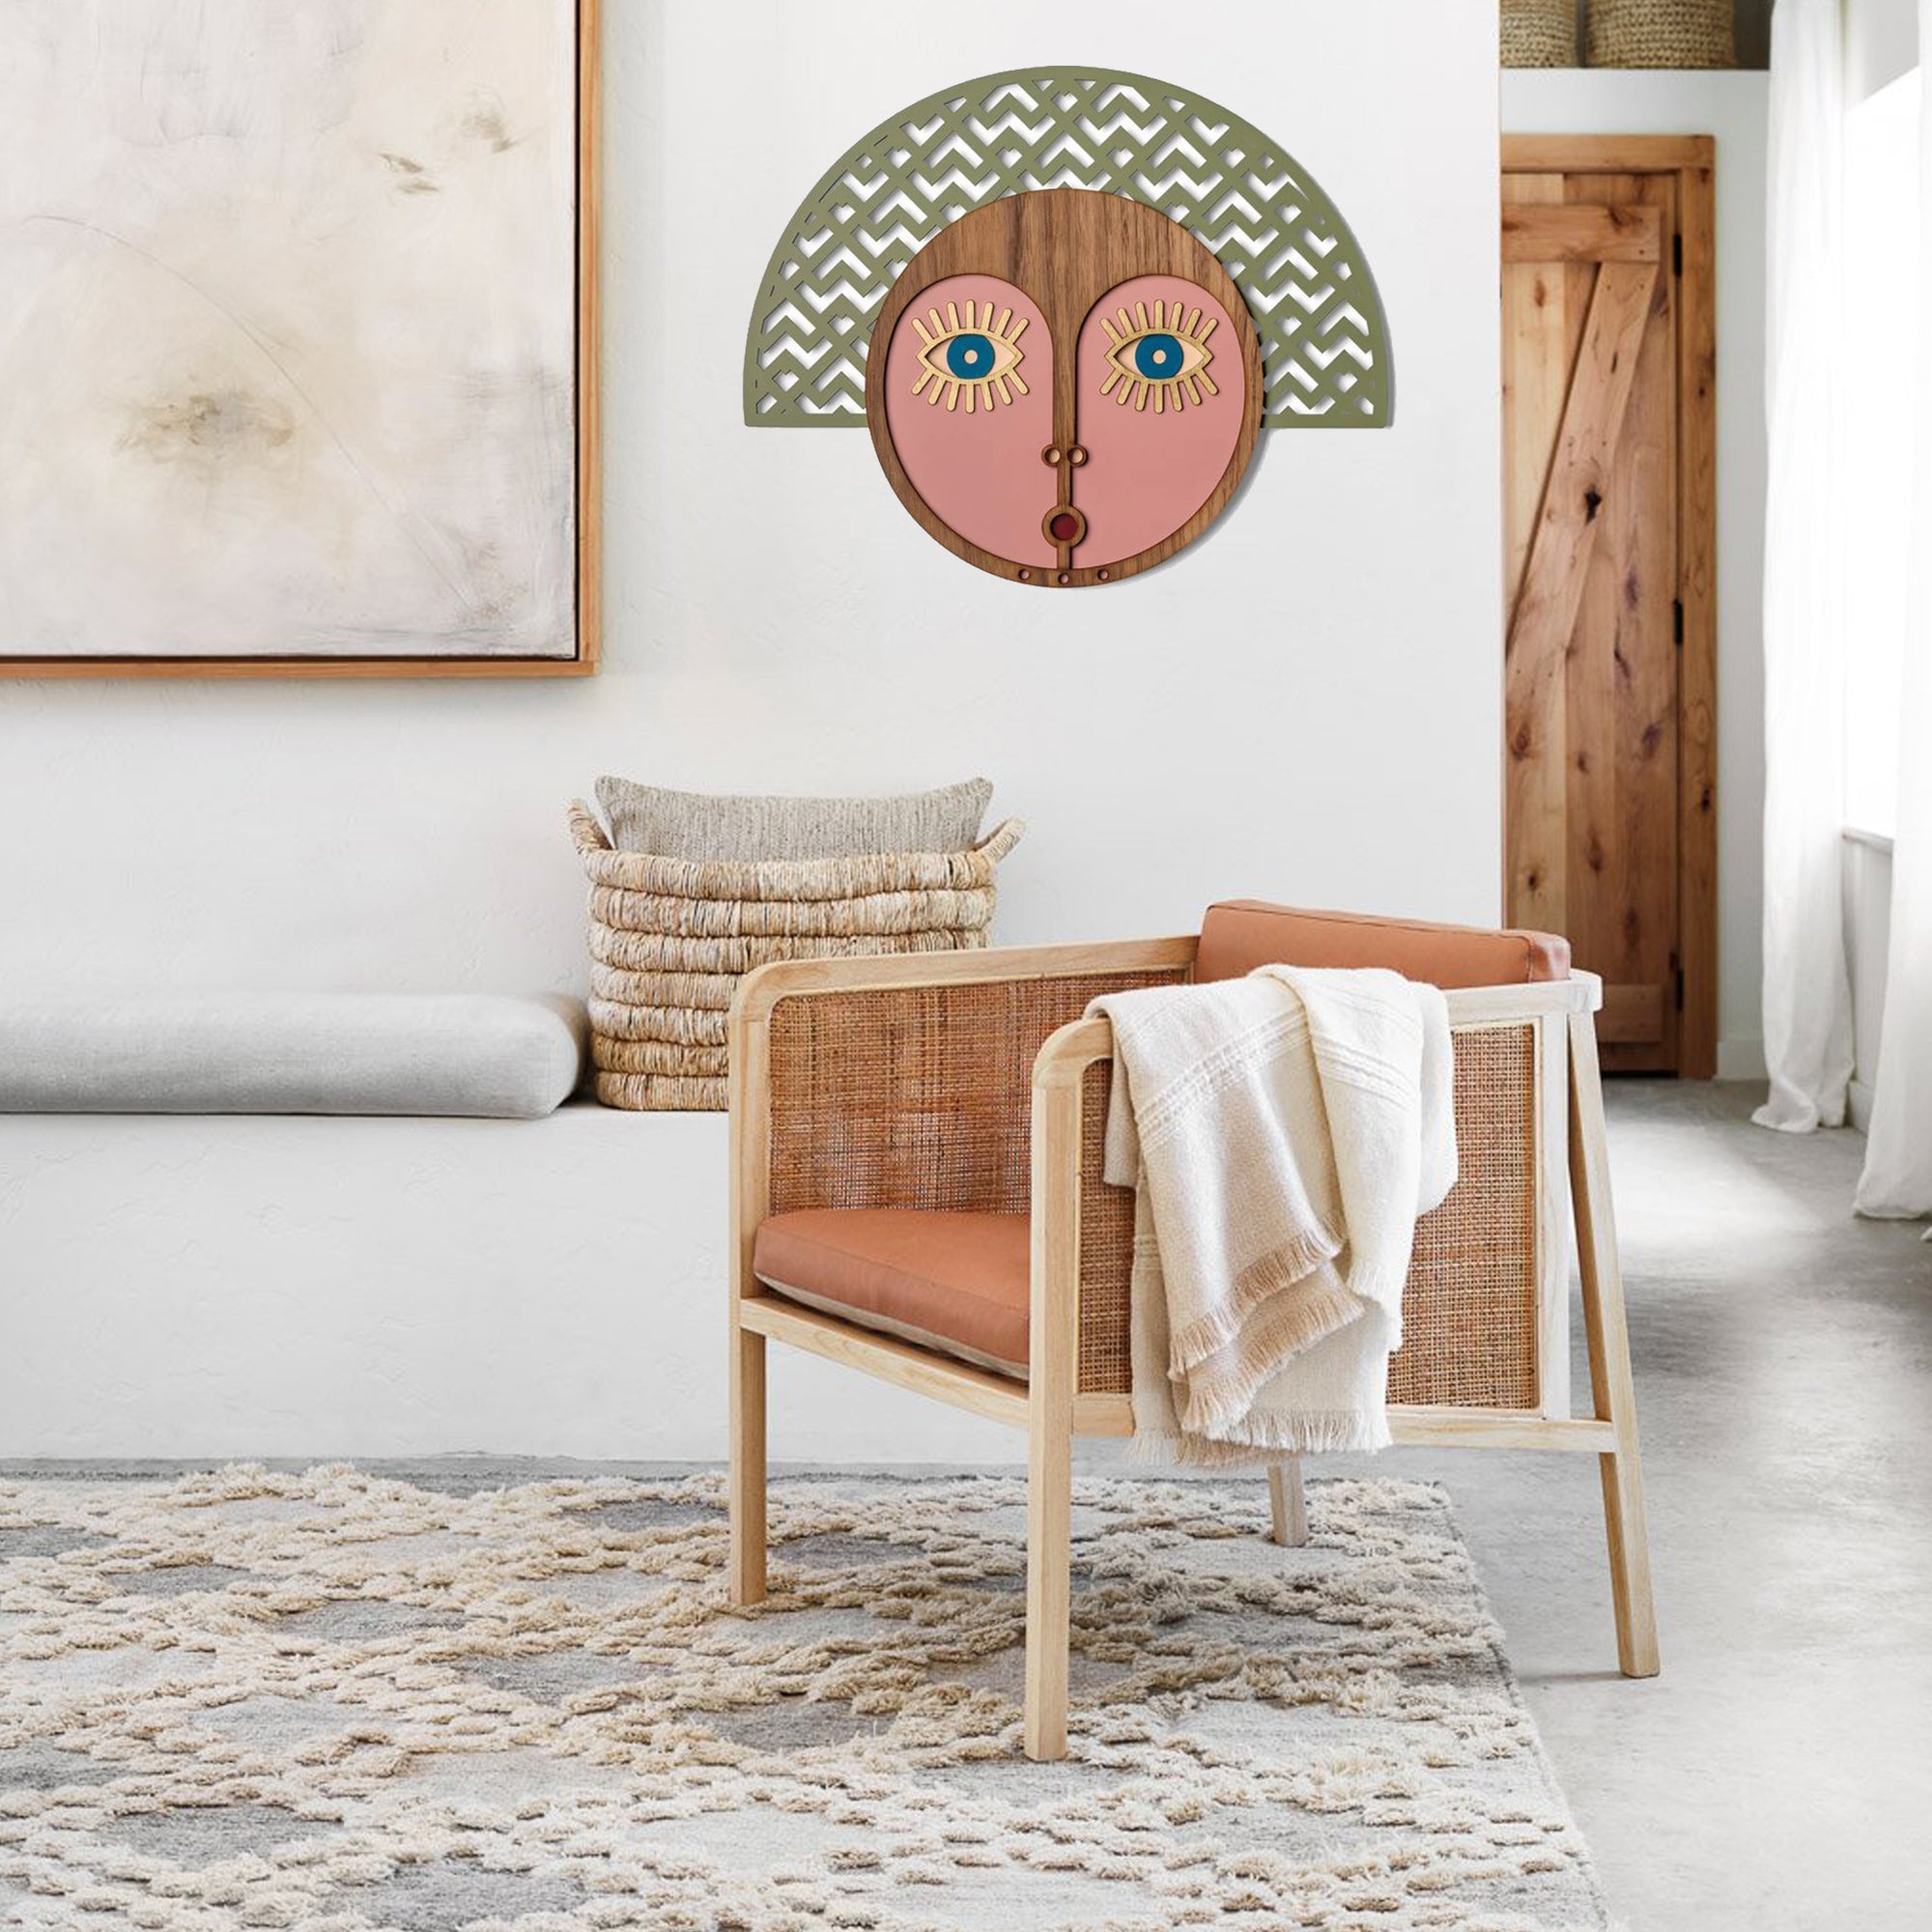 Afrocentric Wall Art African Mask on the Wooden in Boho Decor